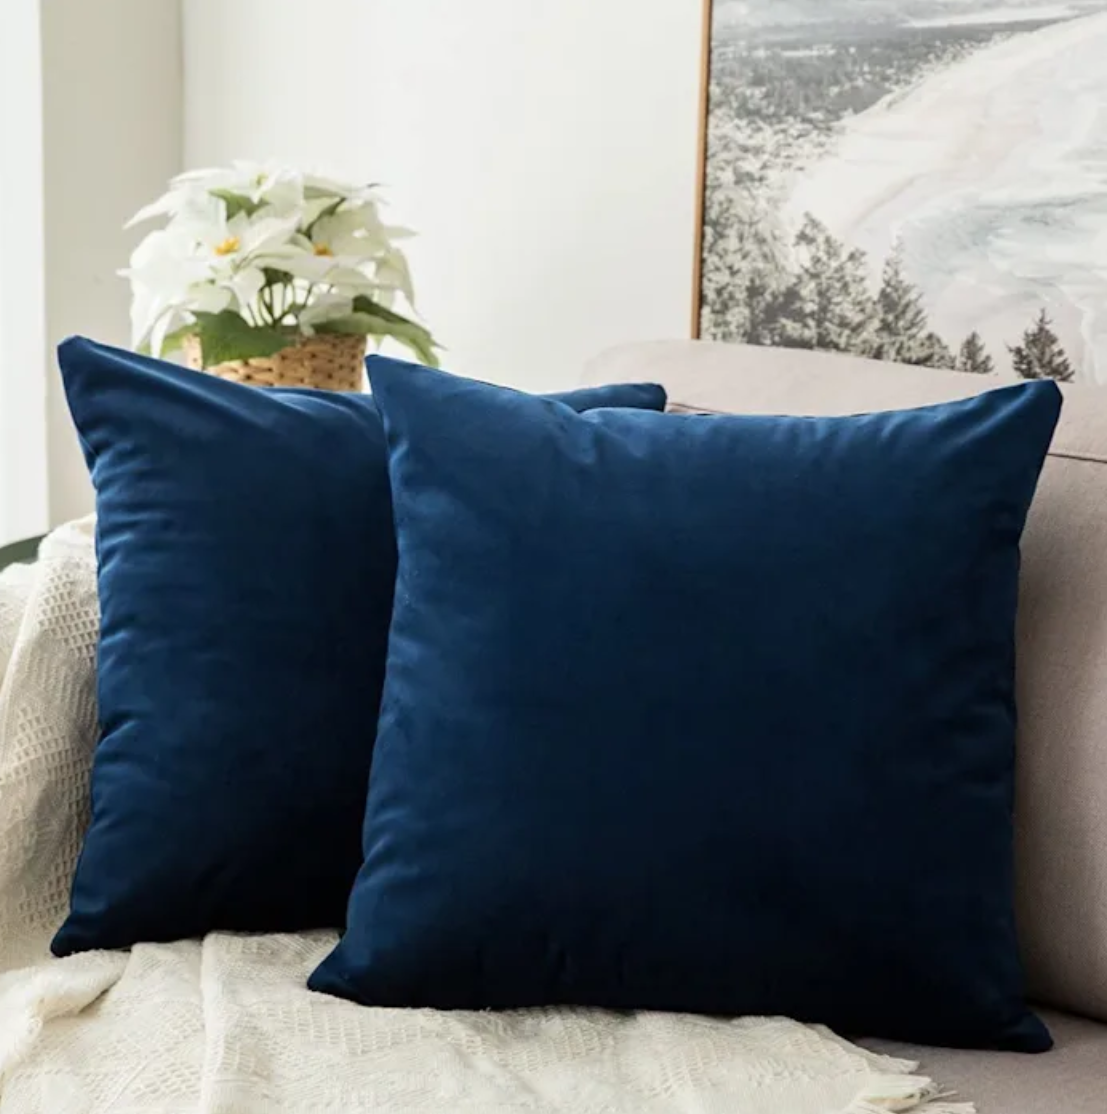 Give your room a spring makeover for as low as $6 each with these trendy pillow covers